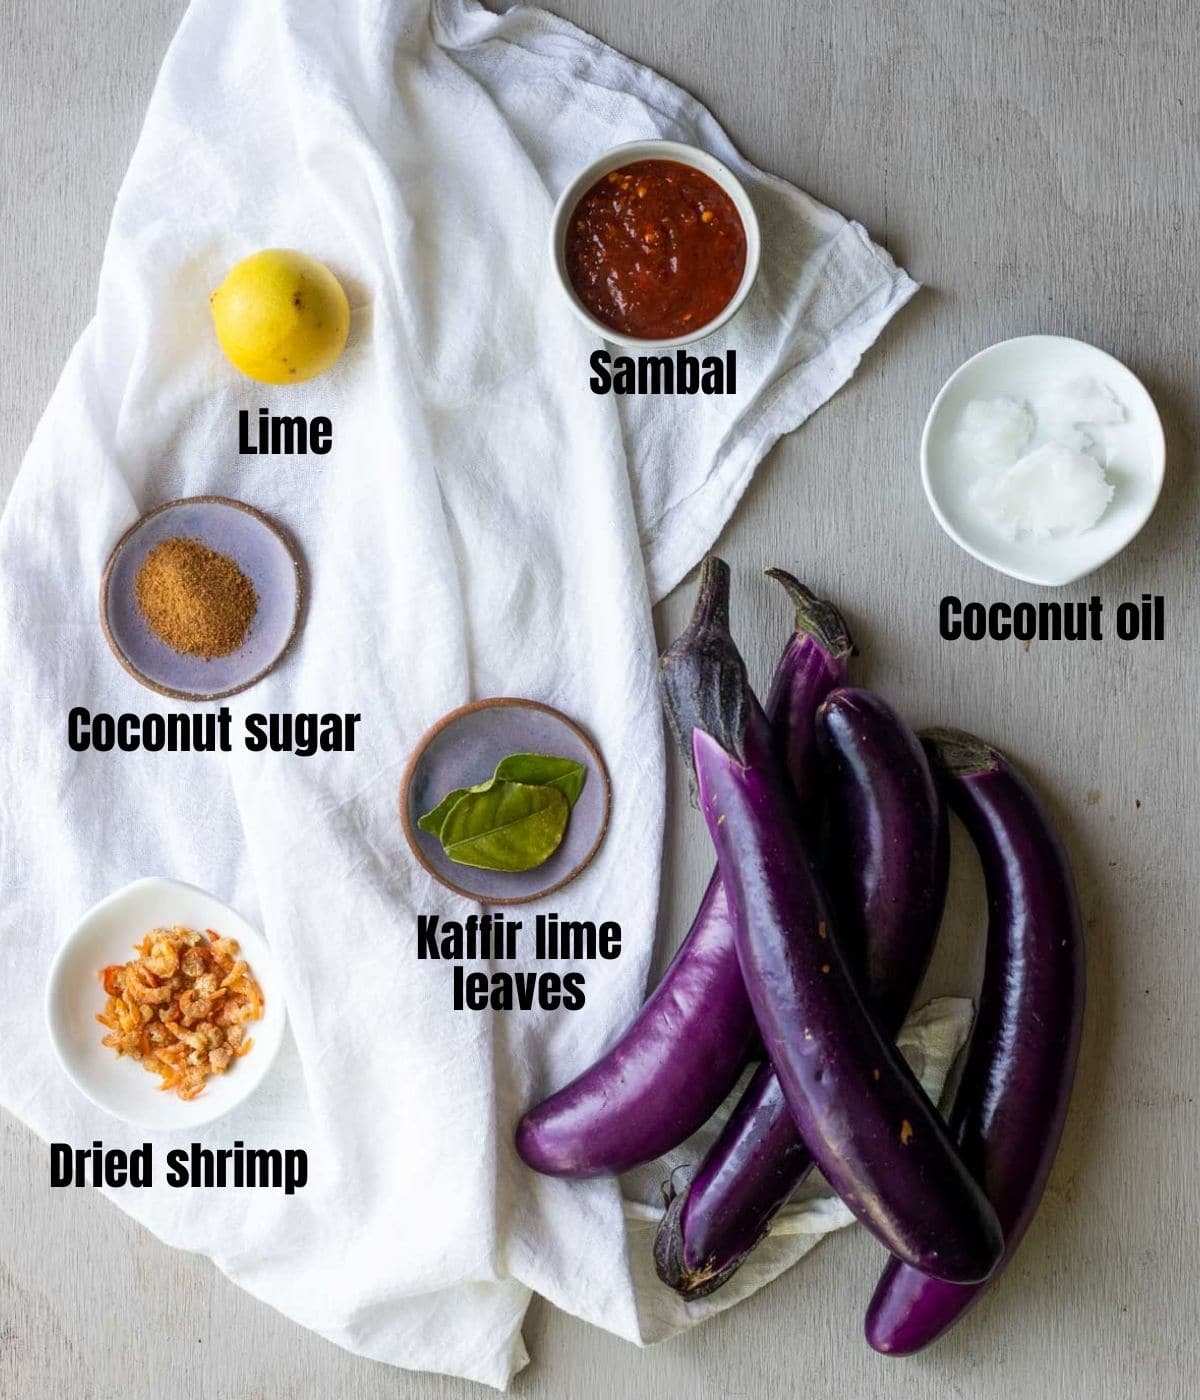 Ingredients to make sambal eggplant arranged individually and labelled.